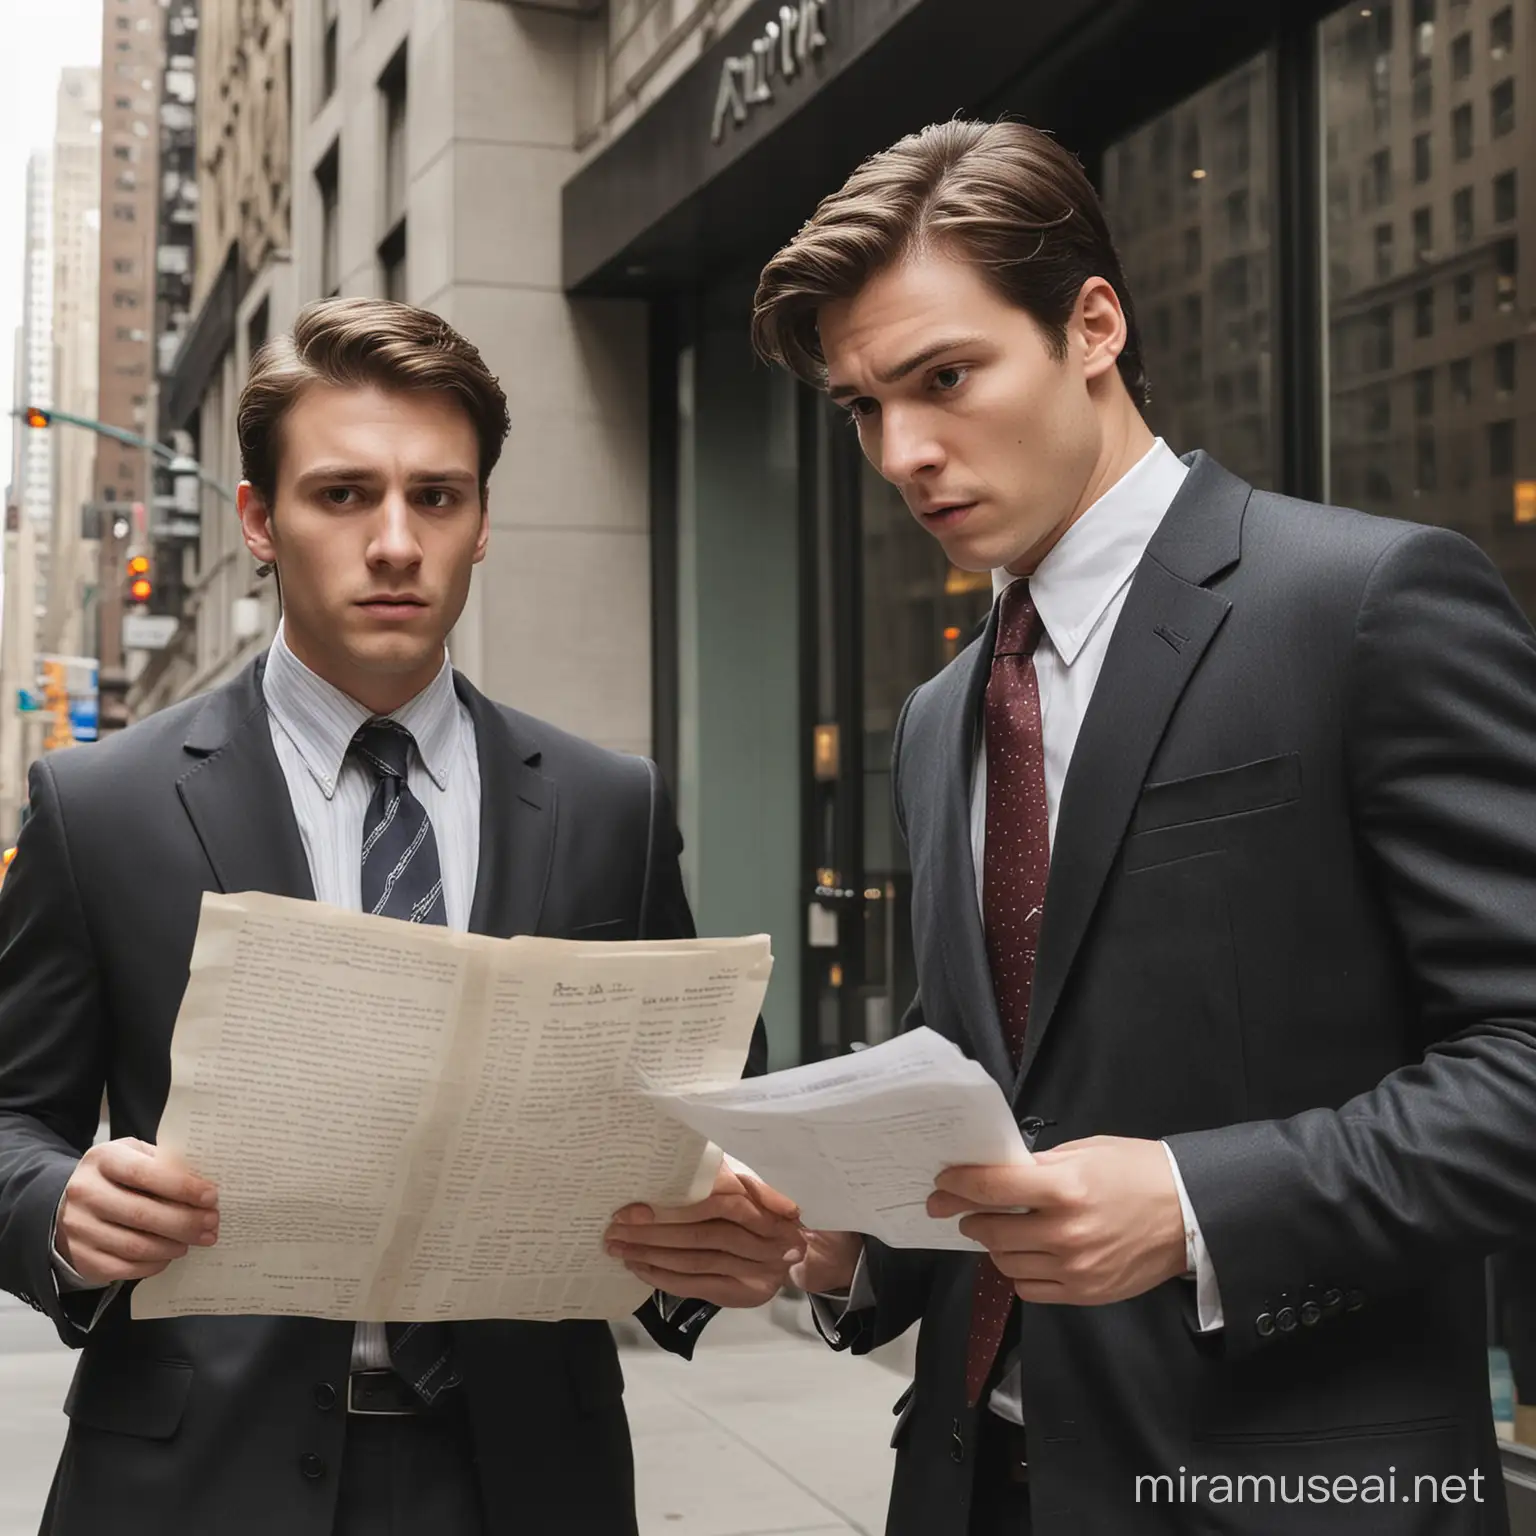 Create an image depicting two brothers, Alex and James, standing outside a grand financial firm in New York City. One brother appears cautious and analytical, while the other exudes a sense of adventure and rebellion. In the background, include a mysterious letter with clues to their uncle's inheritance.